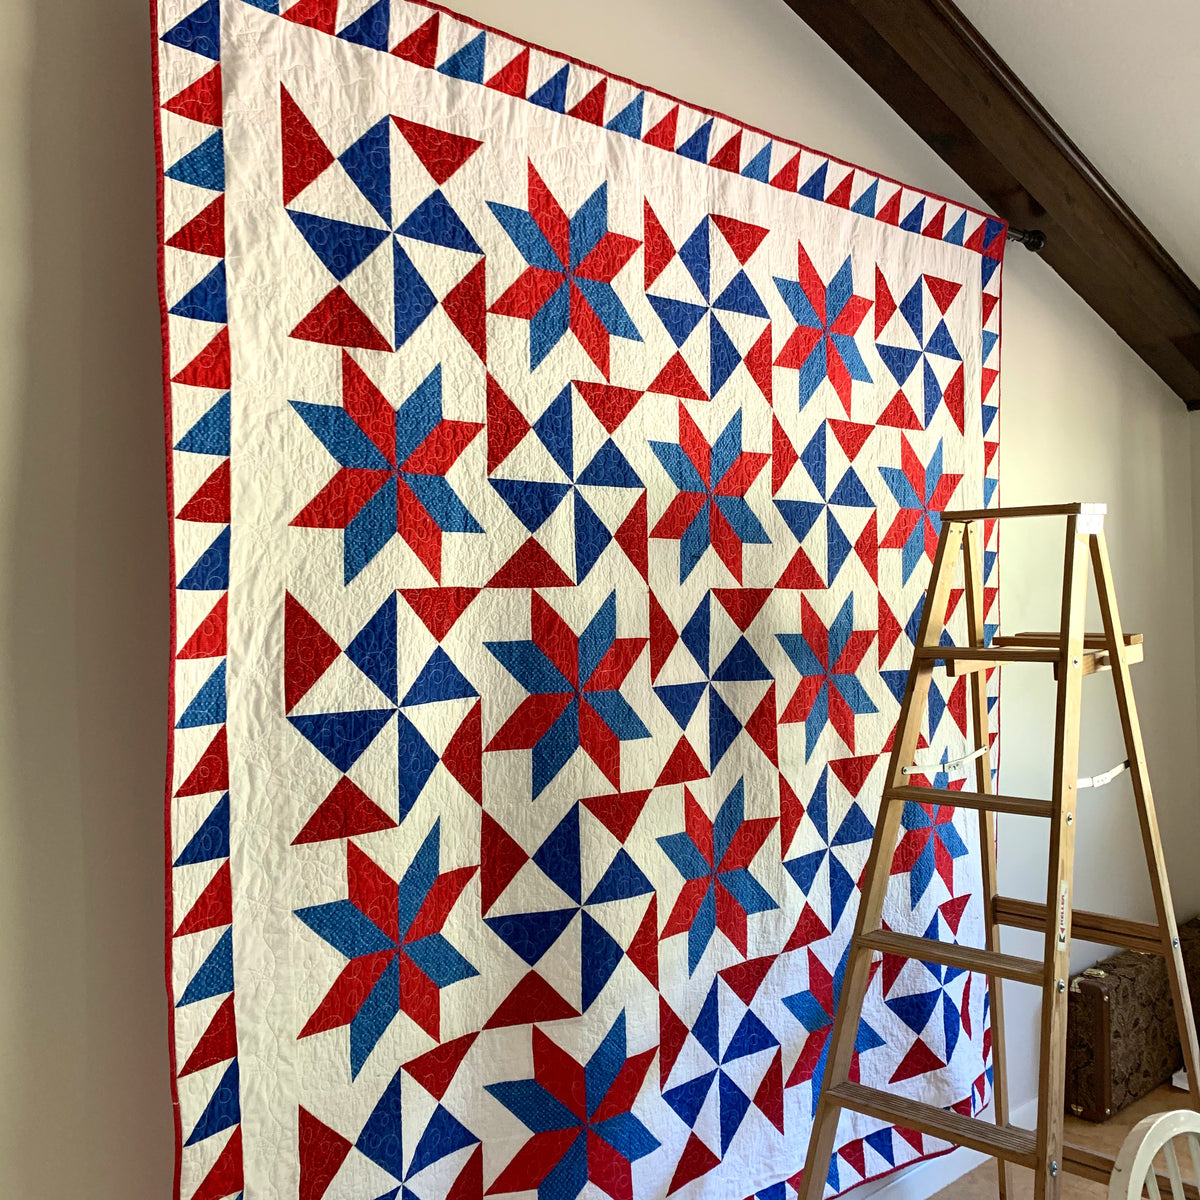 Hanging a Quilt on a Wall Using a Curtain Rod – Bobbin In Quilts